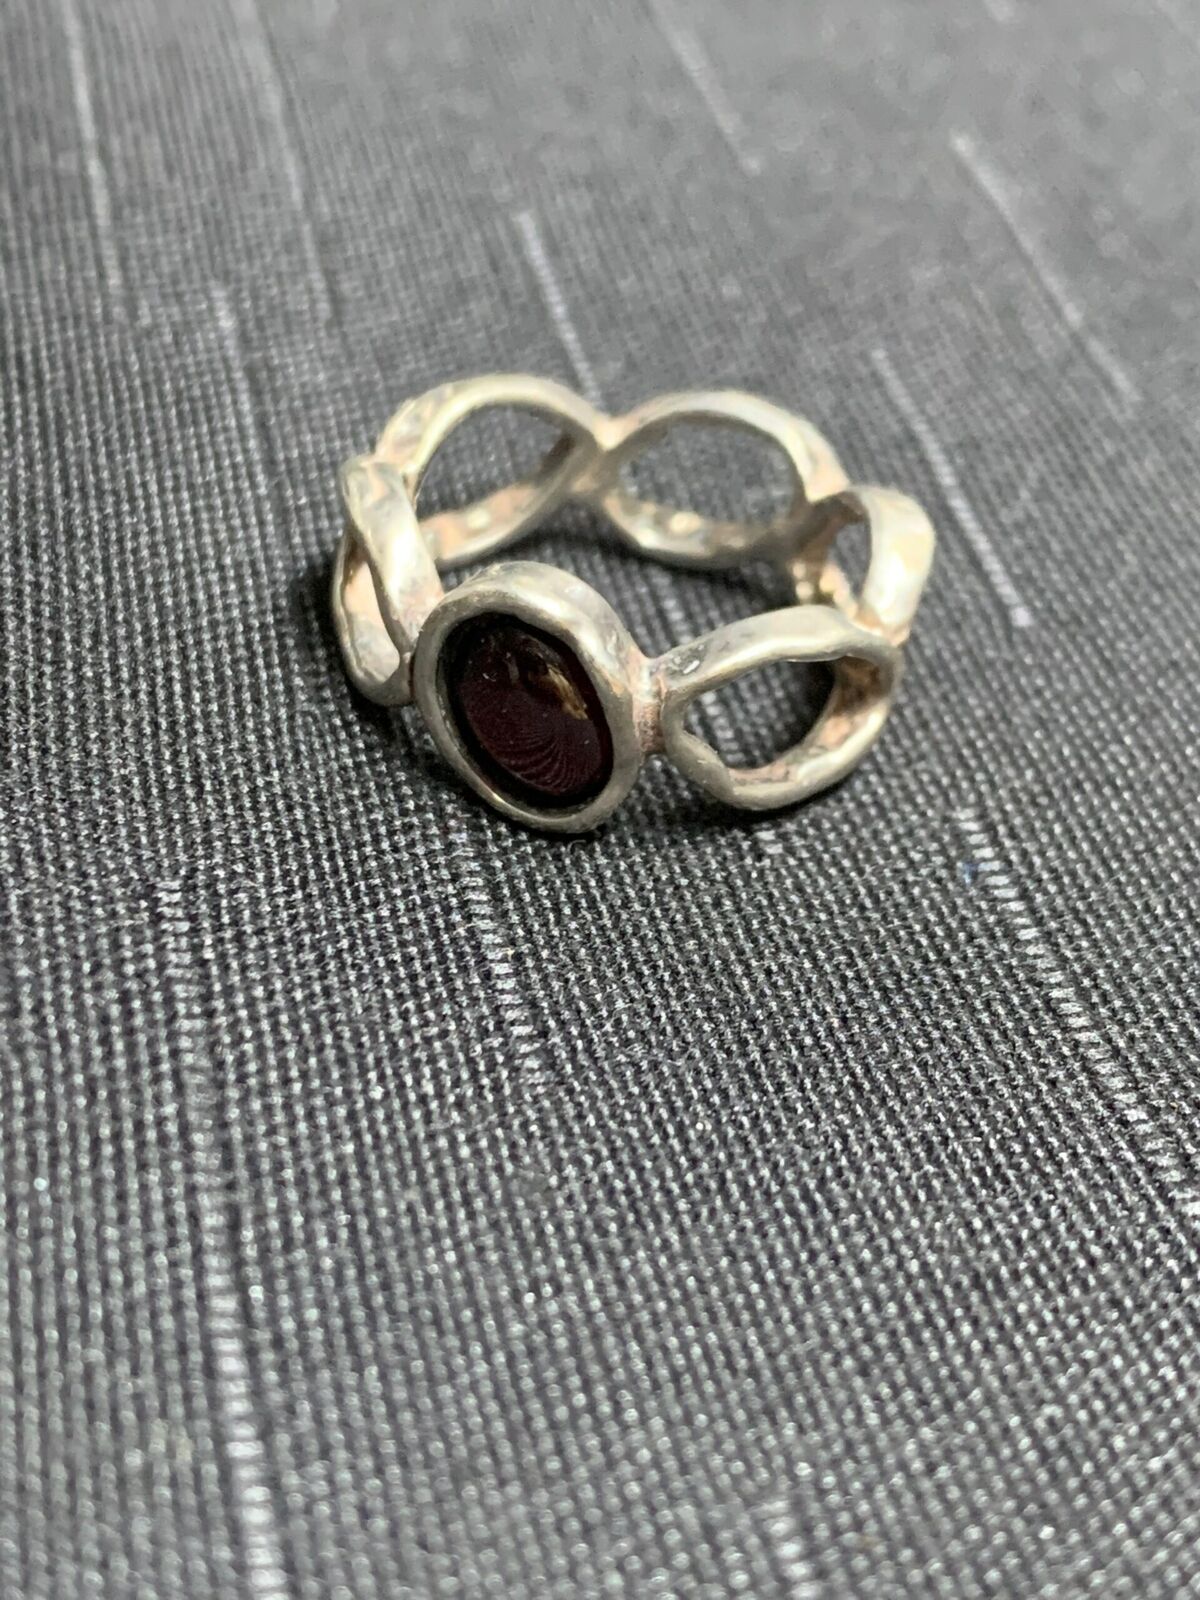 UNISEX SILVER RING - CHAIN PATTERN WITH UNKNOWN RED STONE SETTING